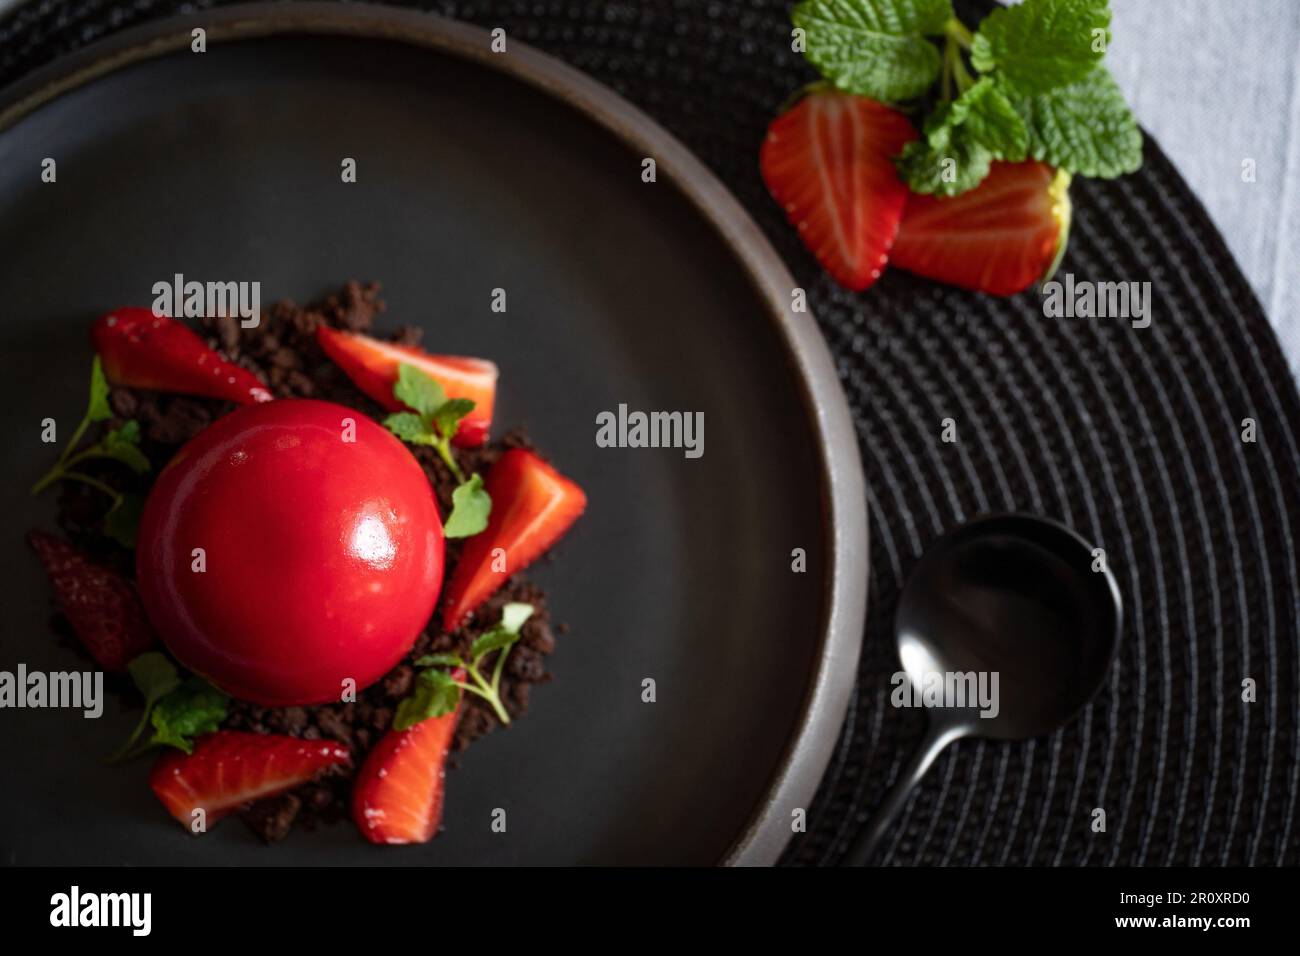 Selective focus of a sphere curd cake with strawberries and brownie. Top view. Dessert with smooth surfaces and mirror glaze. Black plate and spoon. Stock Photo